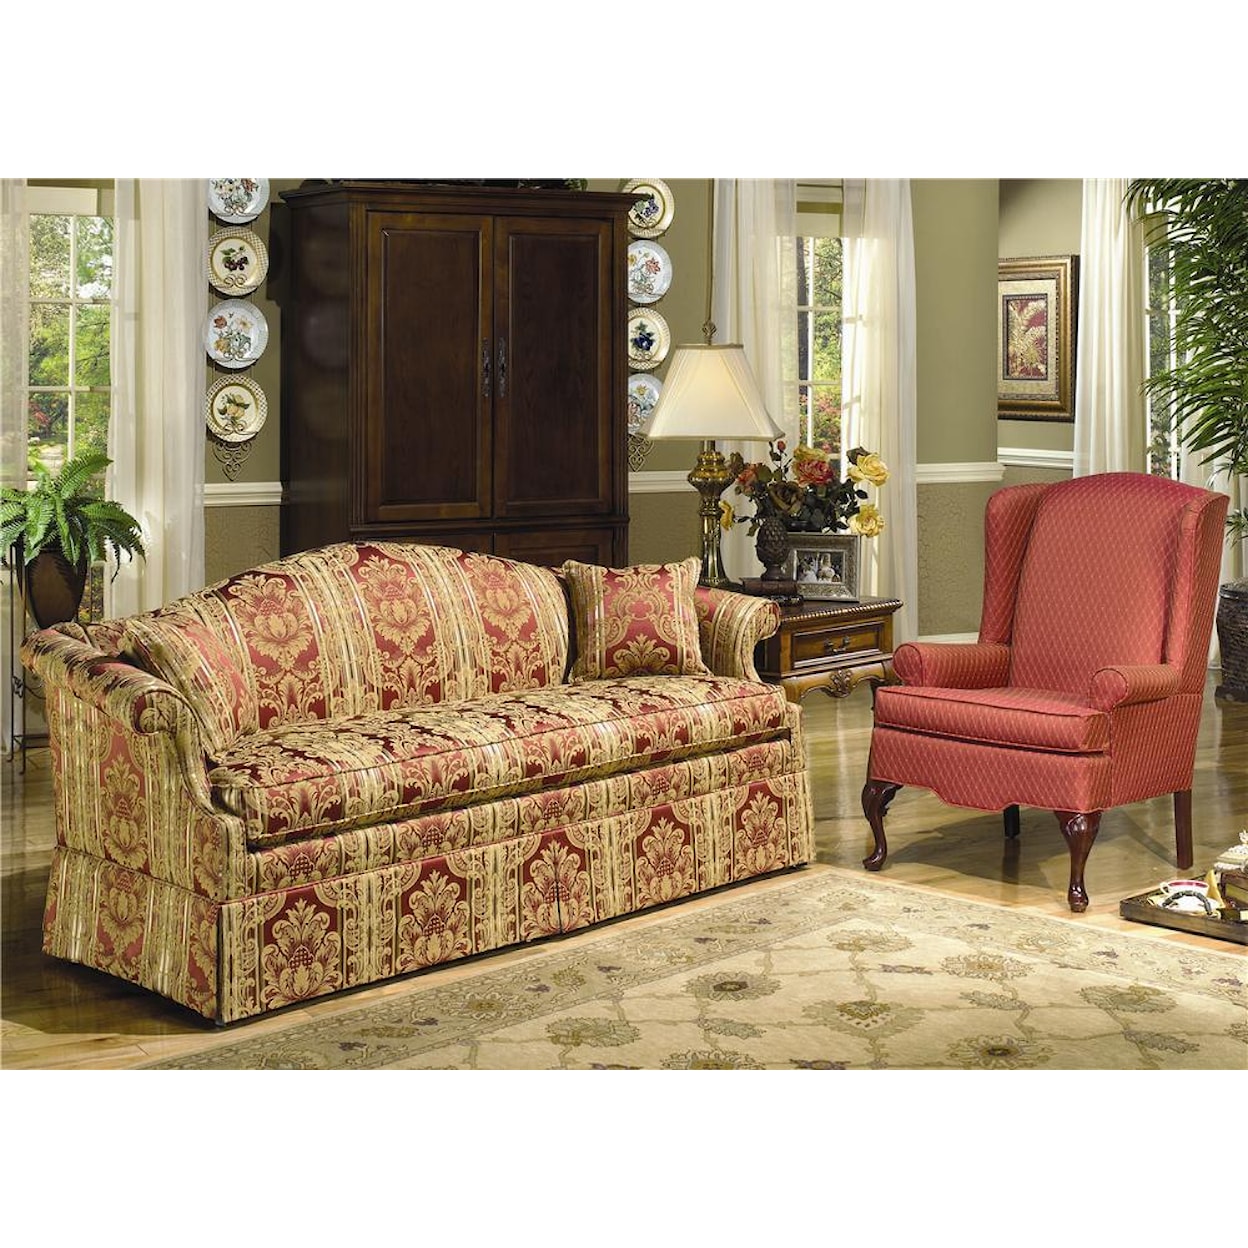 Craftmaster 375  Upholstered Wing Chair